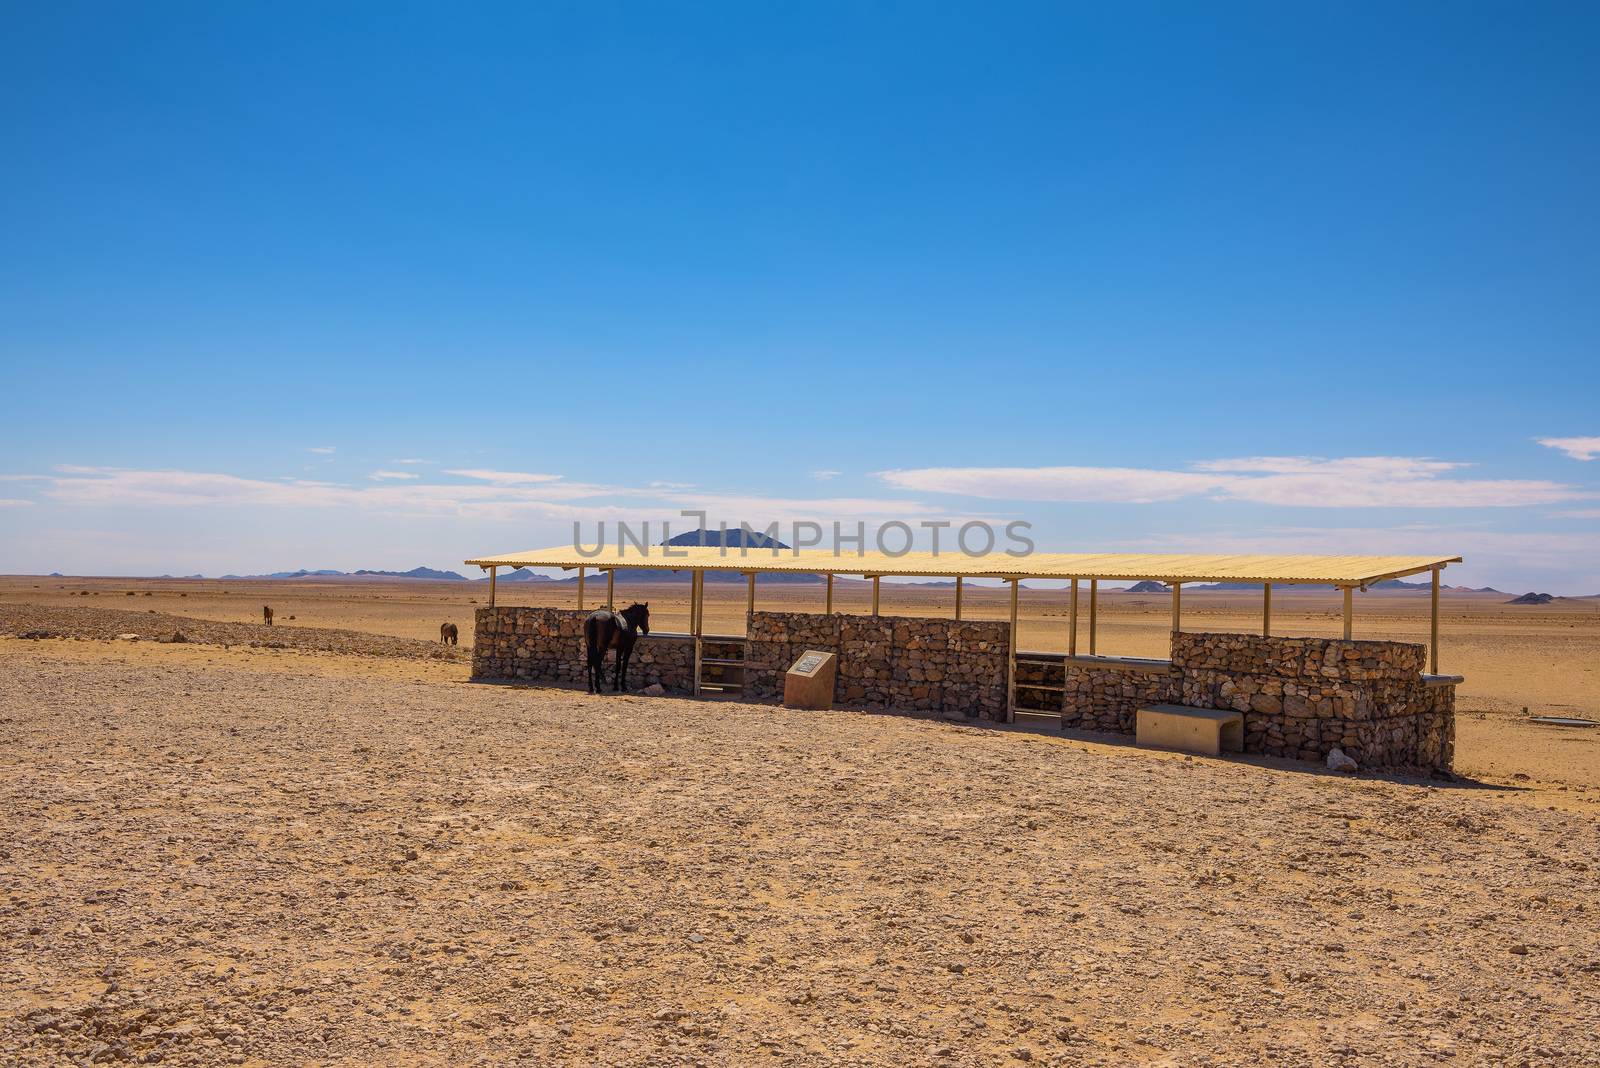 Wild horses of the Namib desert at observation viewpoint near Aus, south Namibia by nickfox